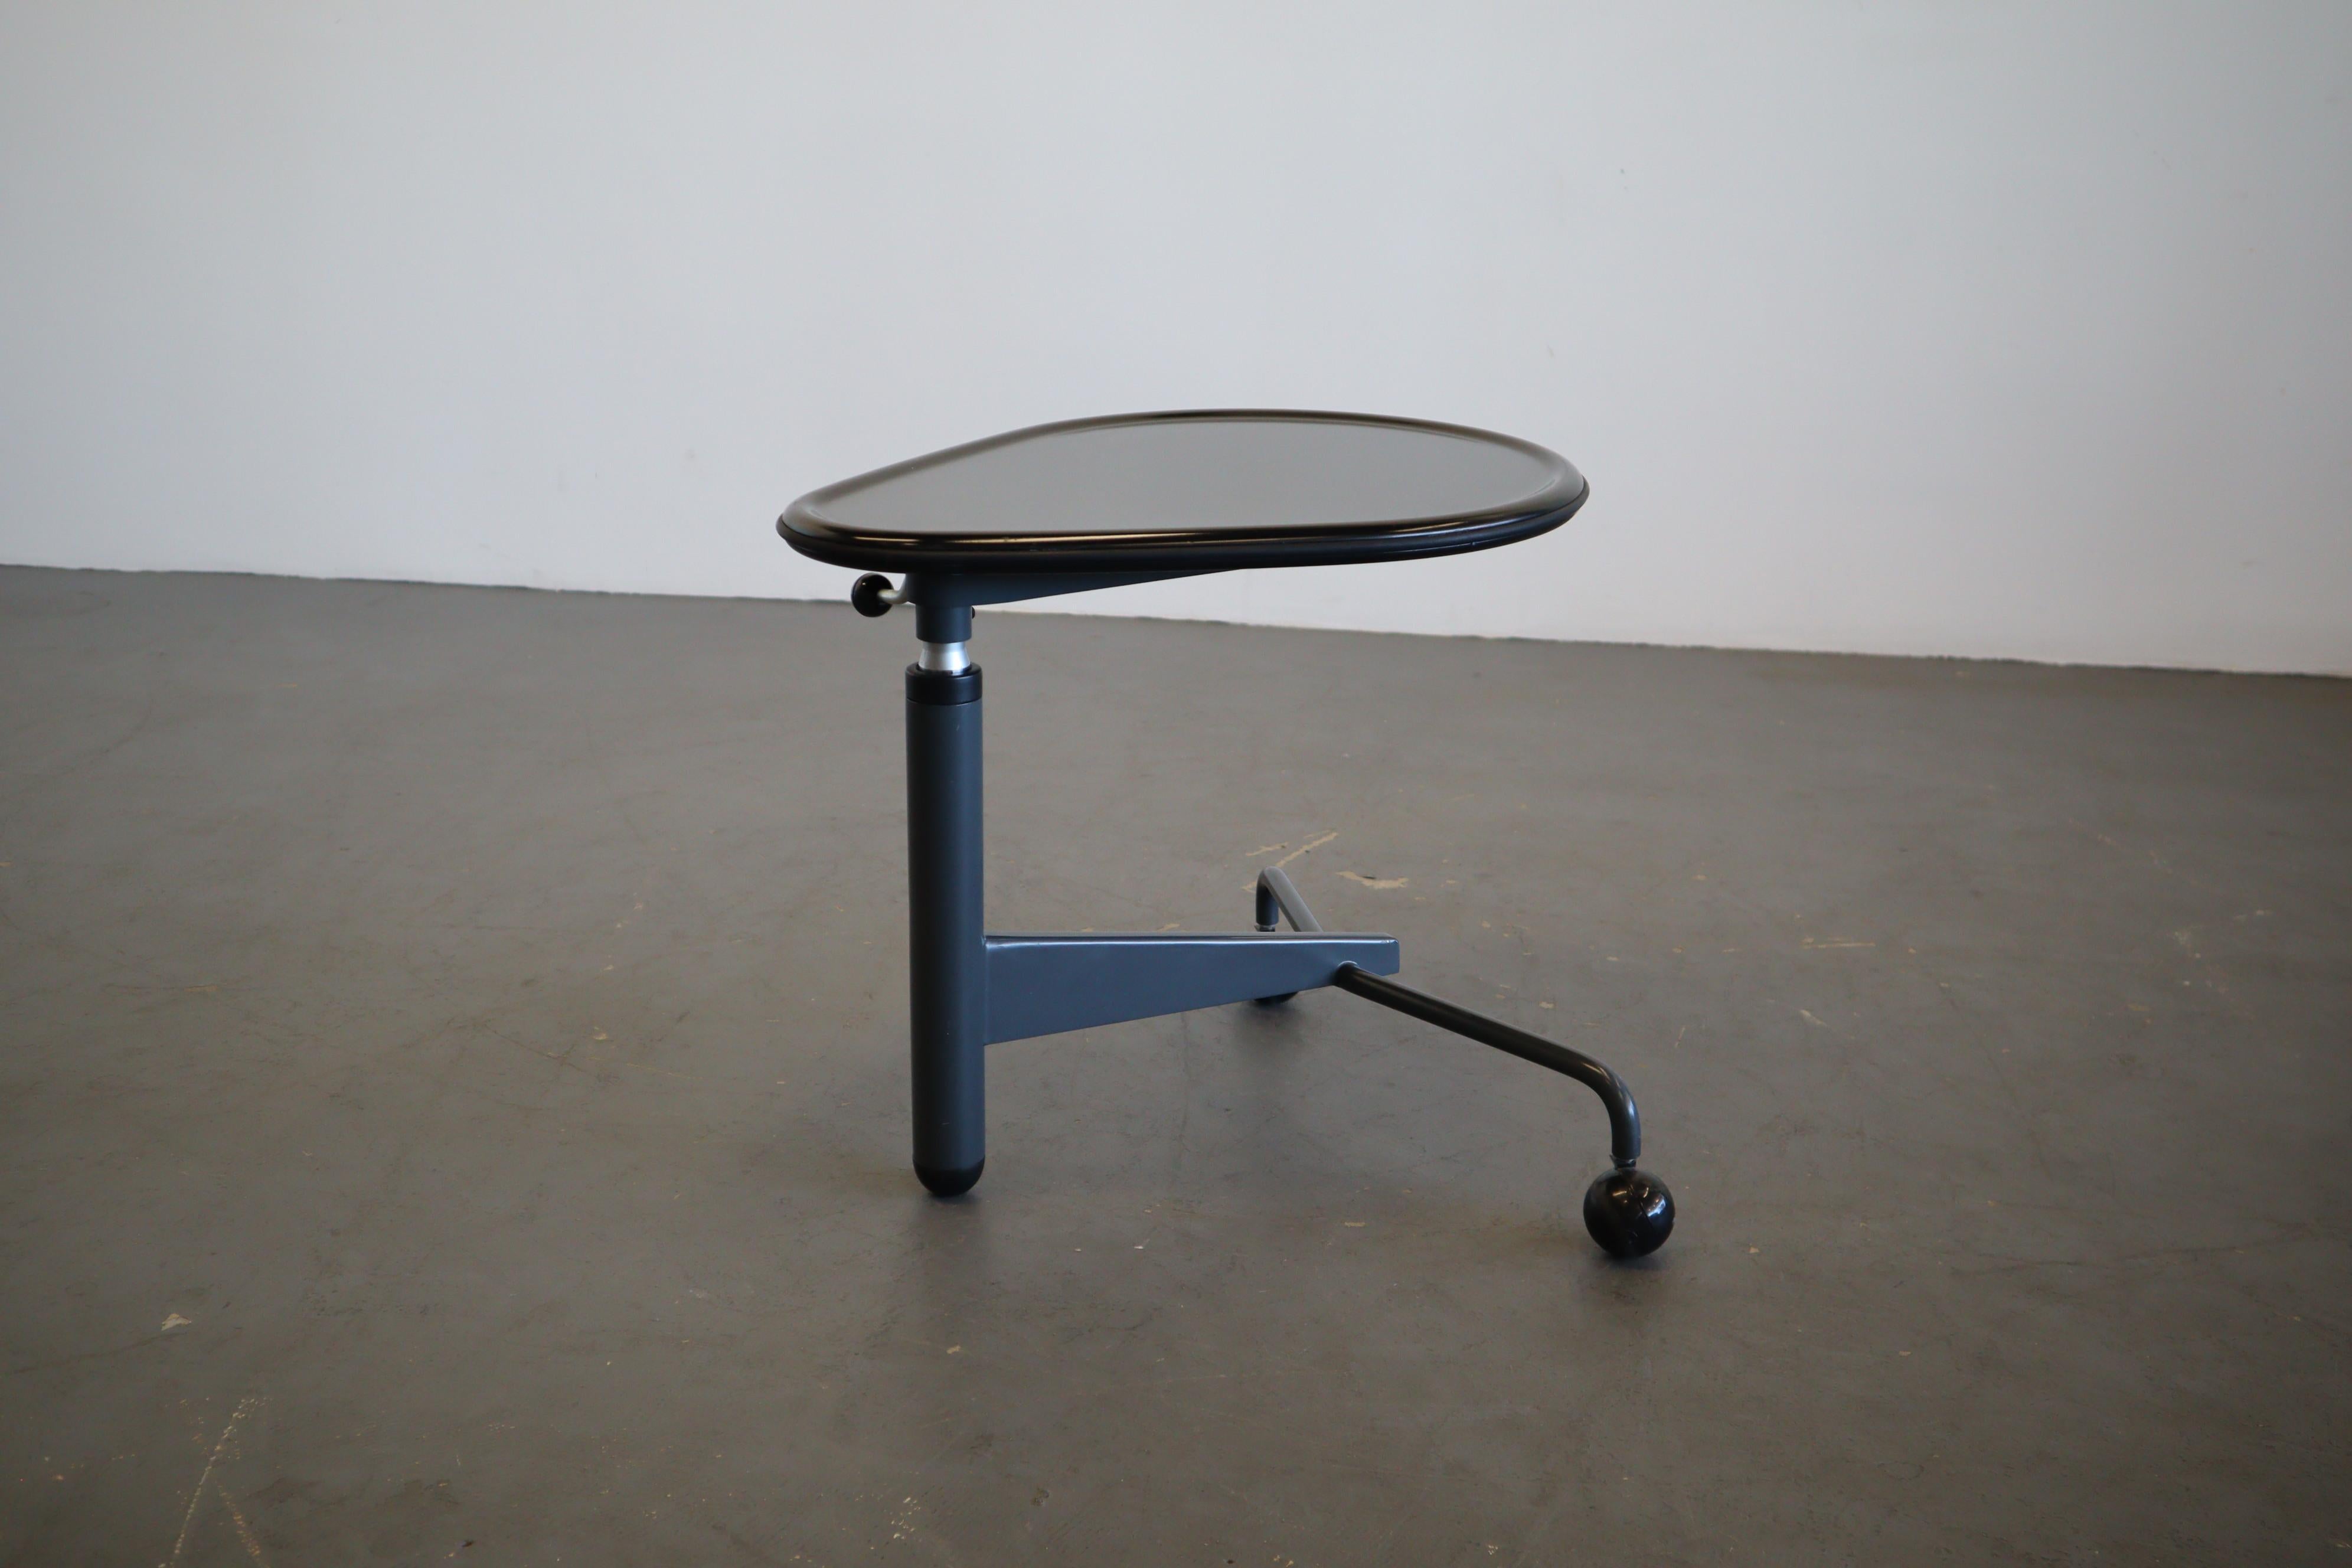 Adjustable height small side table by well known Japanese designer Toshiyuki Kita. This very unique design has the ability to compliment any style. It has a black lacquered composite top with a grey metal lower frame and plastic casters. This piece